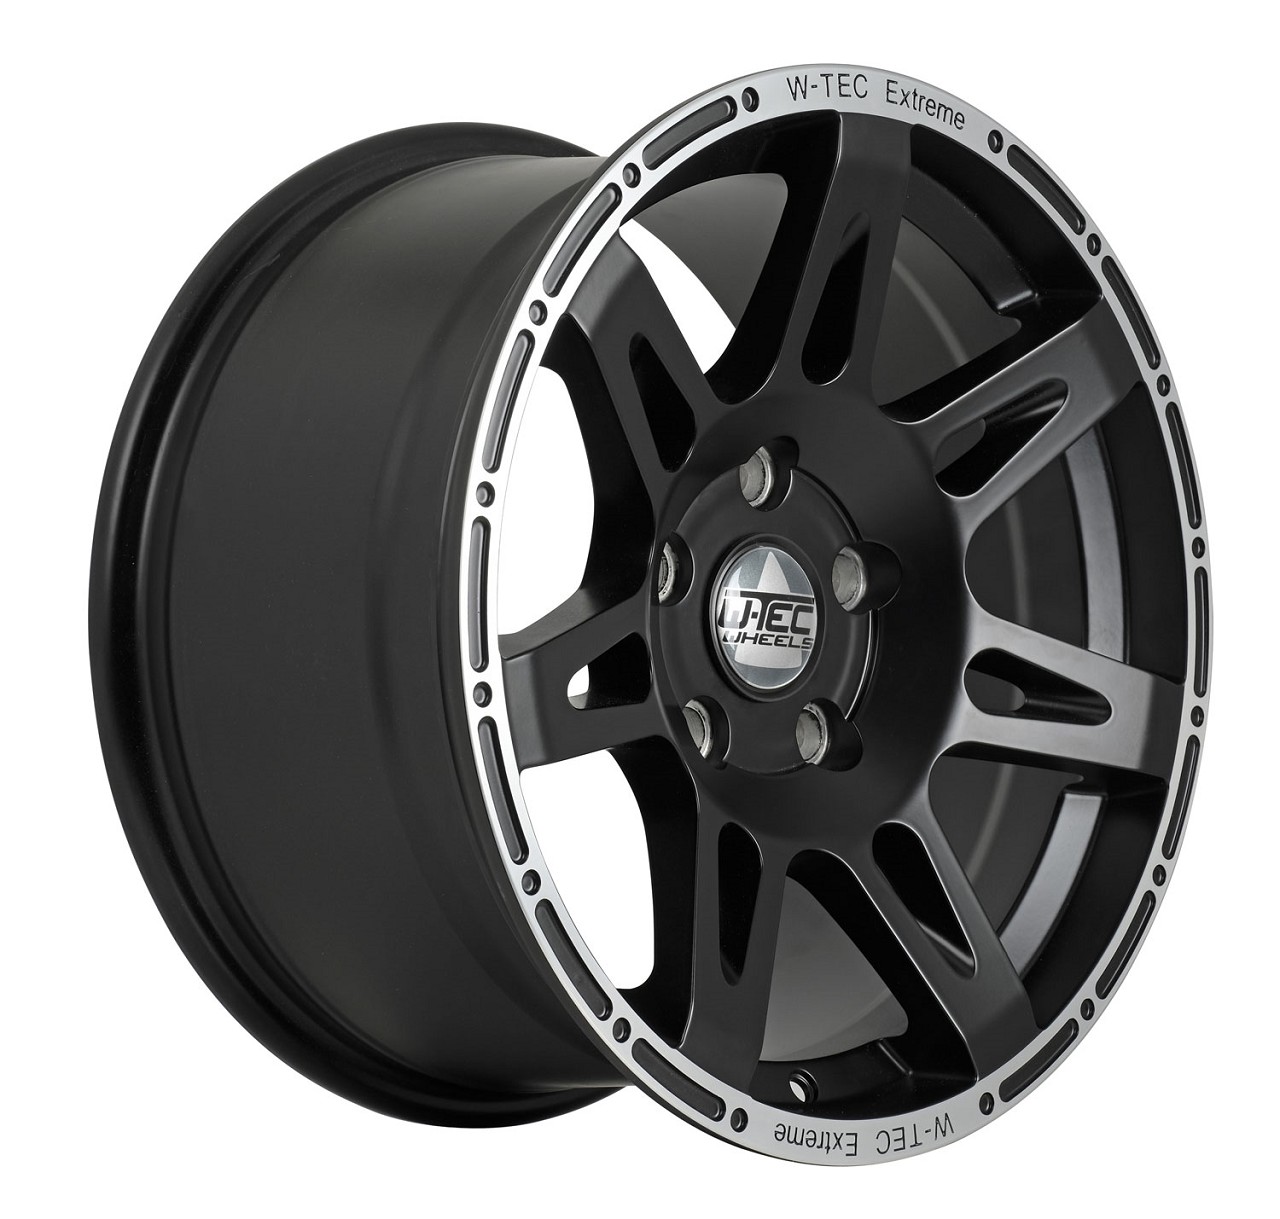 4x Alloy wheel W-TEC Extreme black-silver 8,5x17 offset+30 fits Jeep Commander WH (2006-2010)